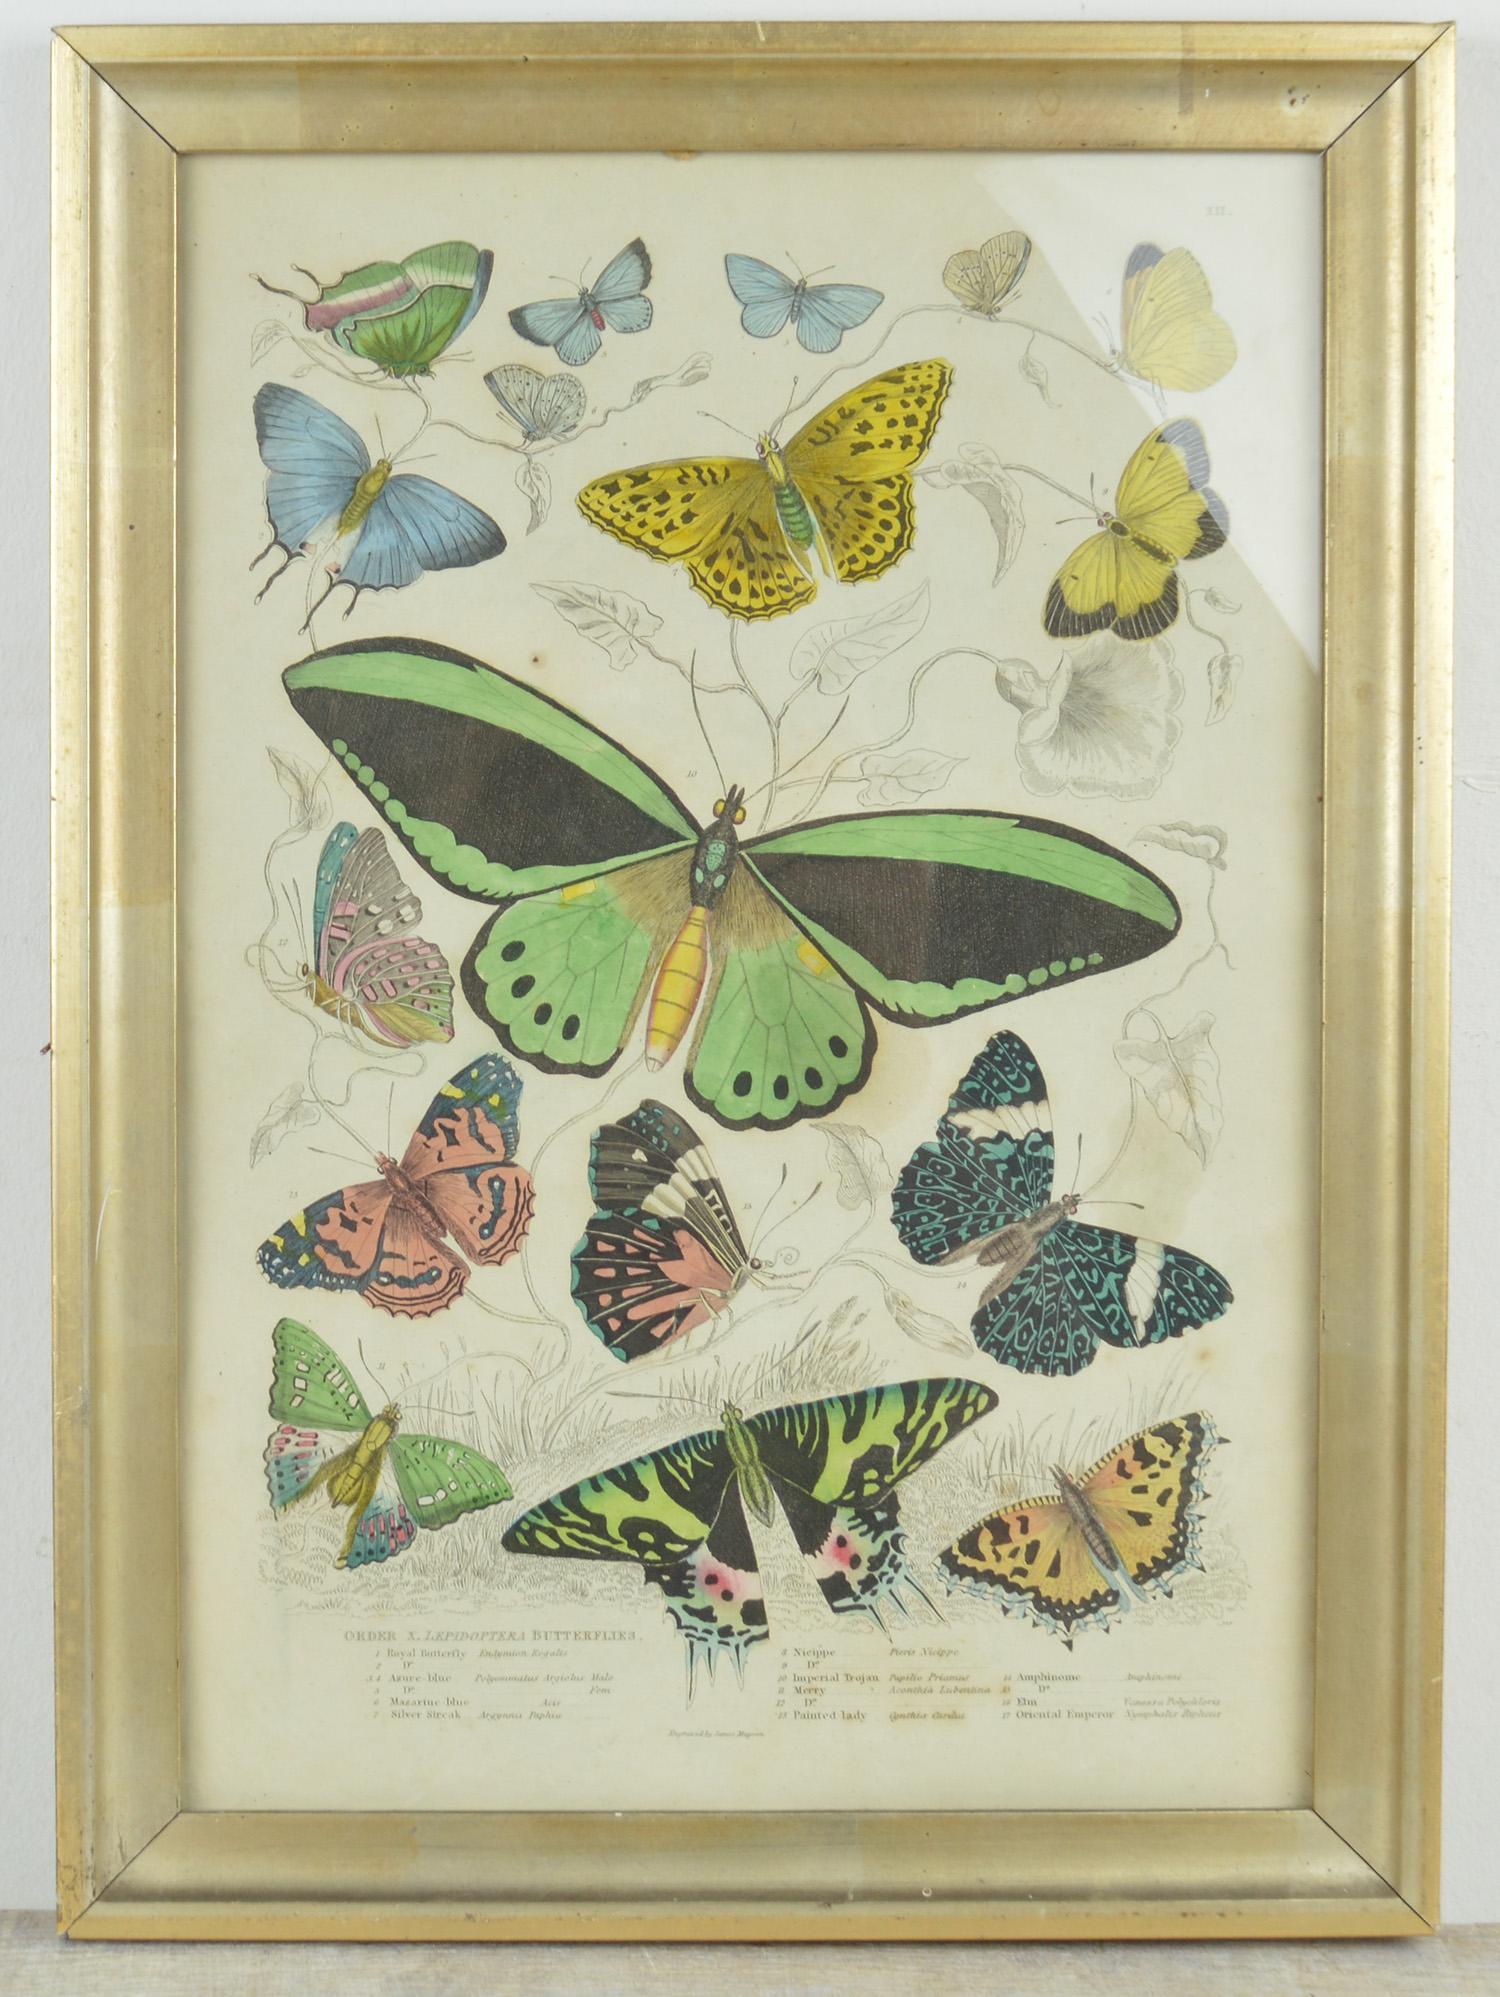 Great image of butterflies.

Hand-colored lithograph.

Original color.

From The Edinburgh Journal of Natural History.

Published by Smith, Elder, 1835

Presented in an antique distressed gilt frame.

The measurement given below is the